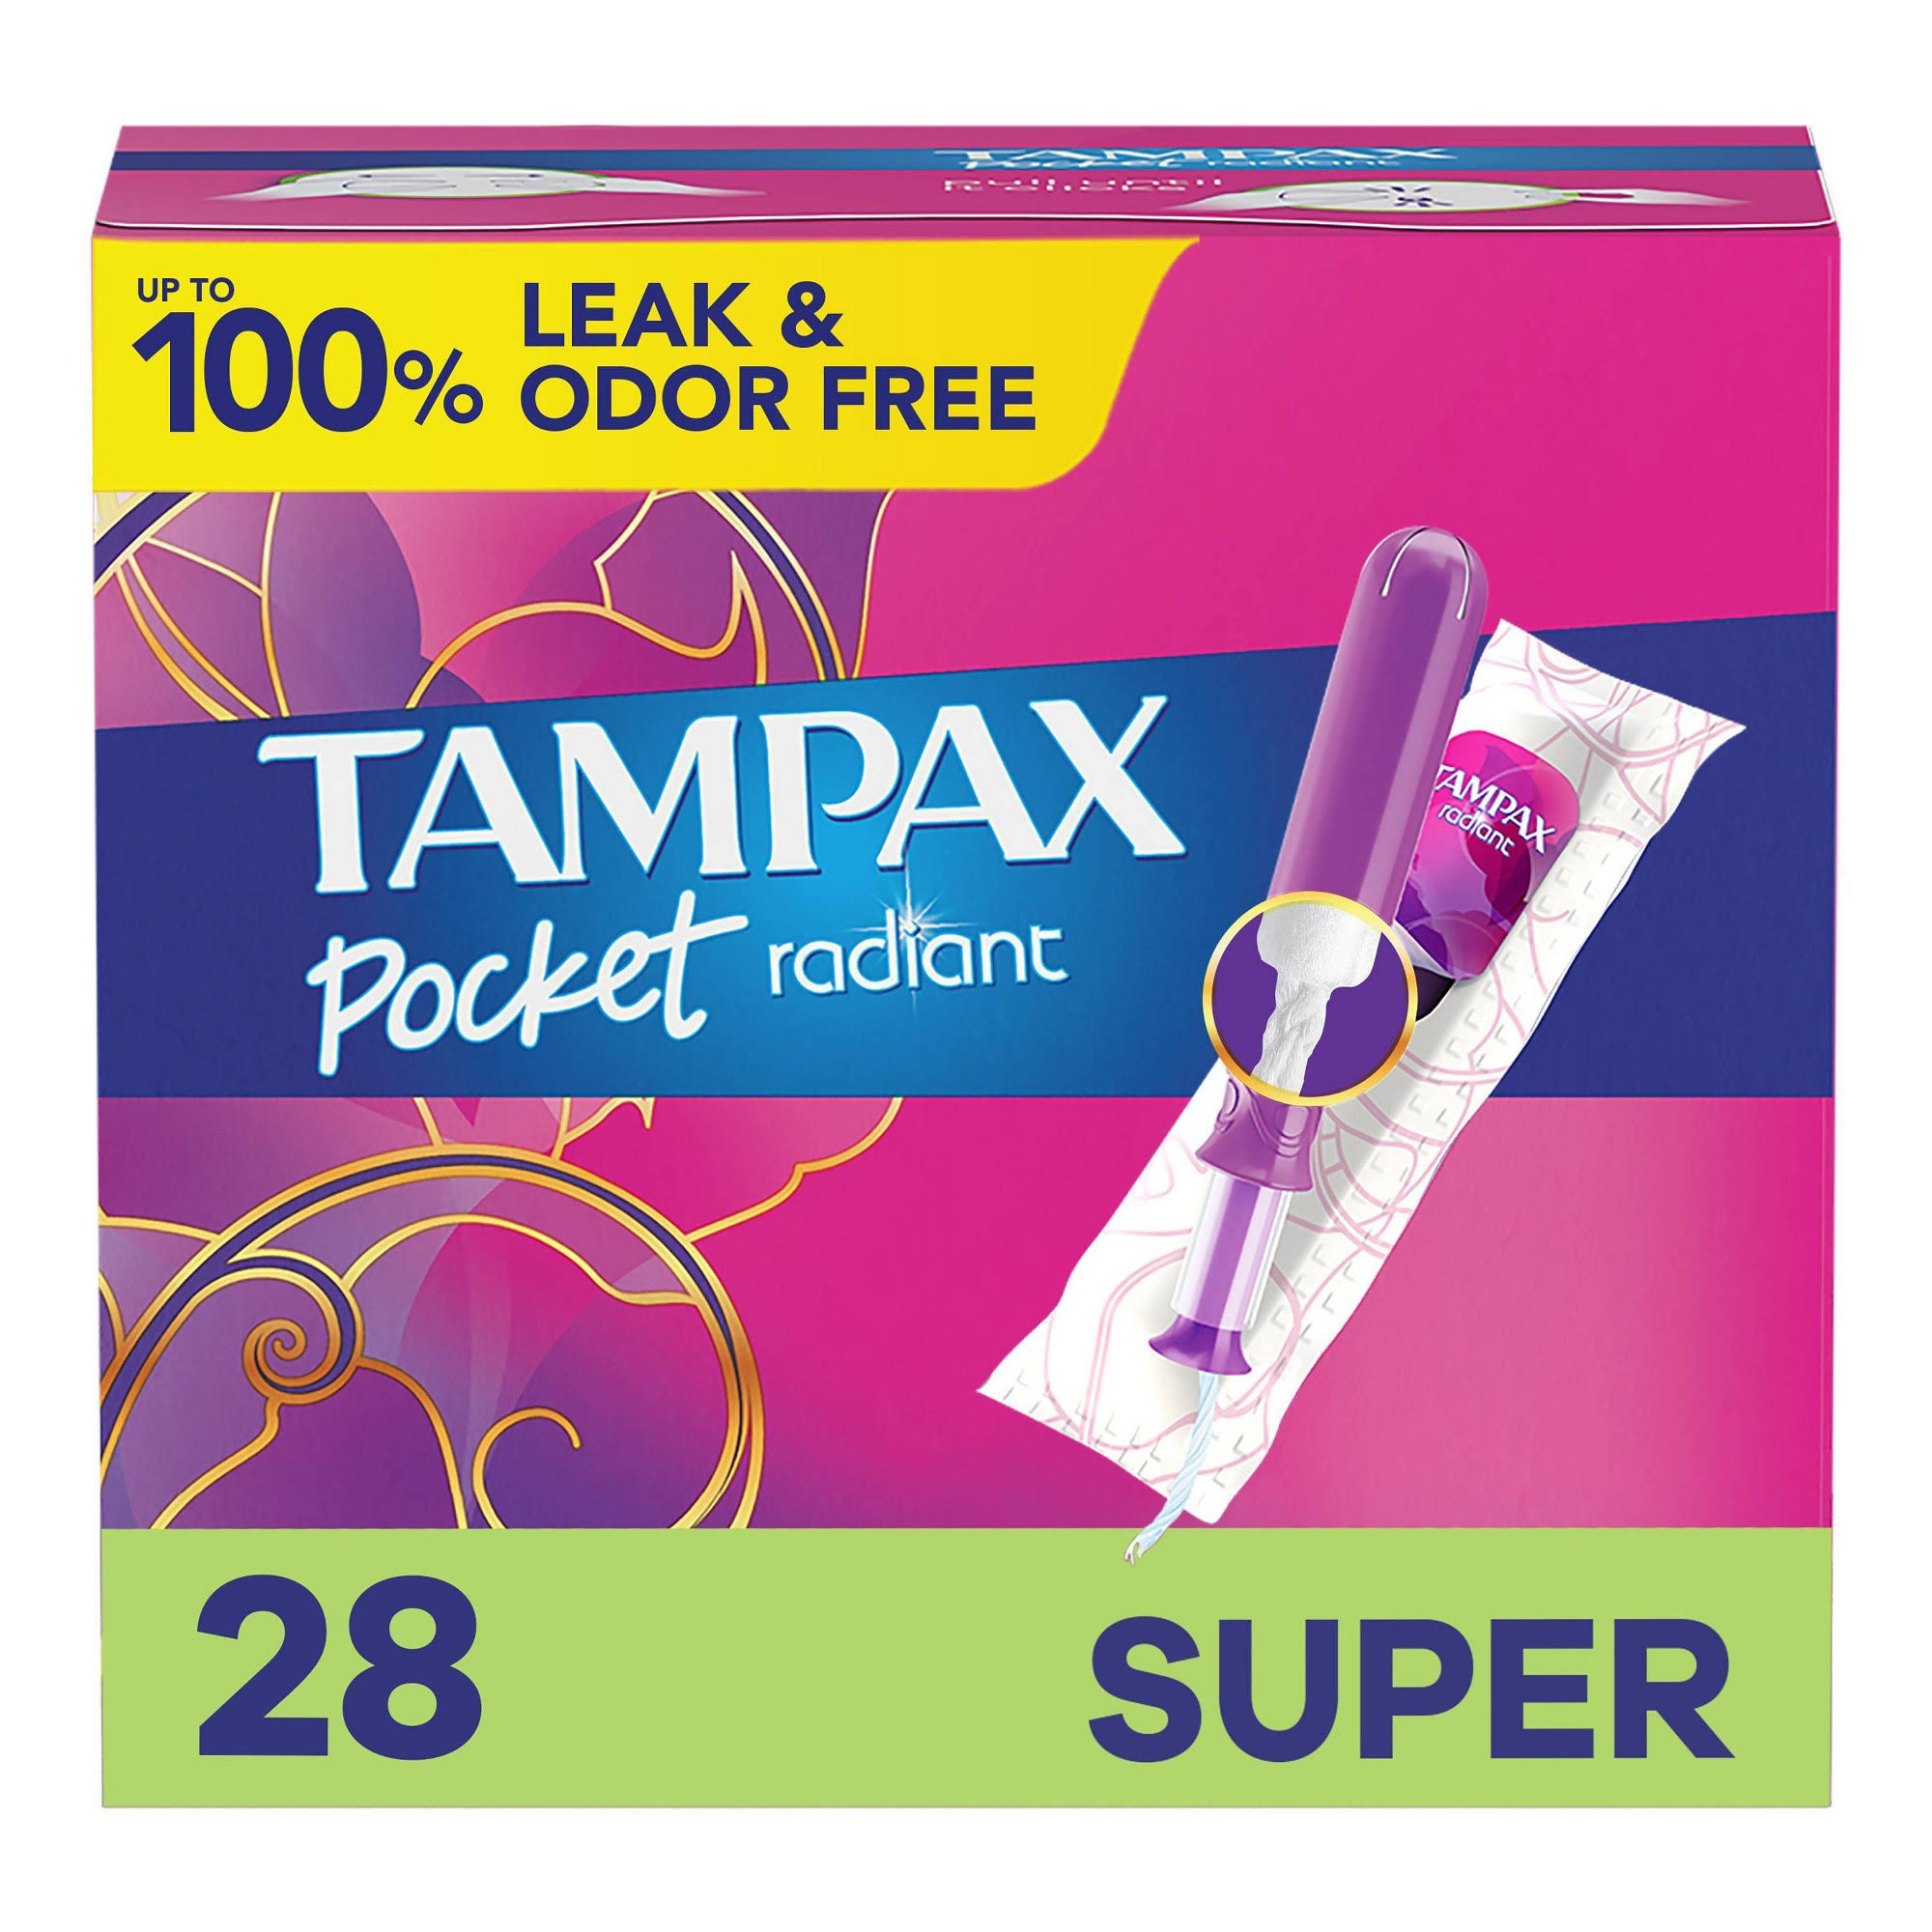 Tampax Pocket Radiant Tampons, Compact, Super Absorbency, Unscented - 28 tampons